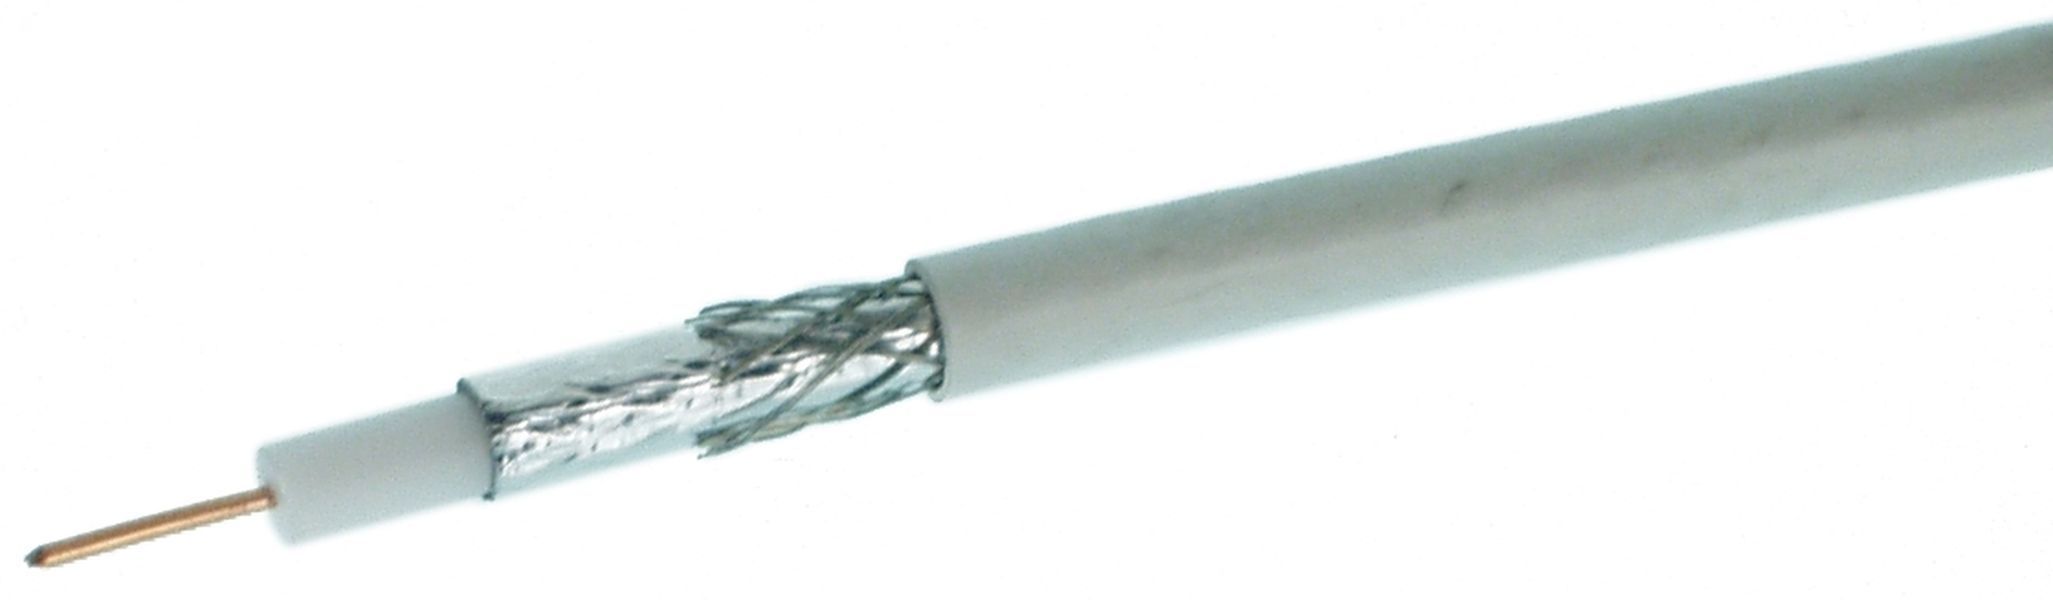 TV antenna cable, 75 Ohm